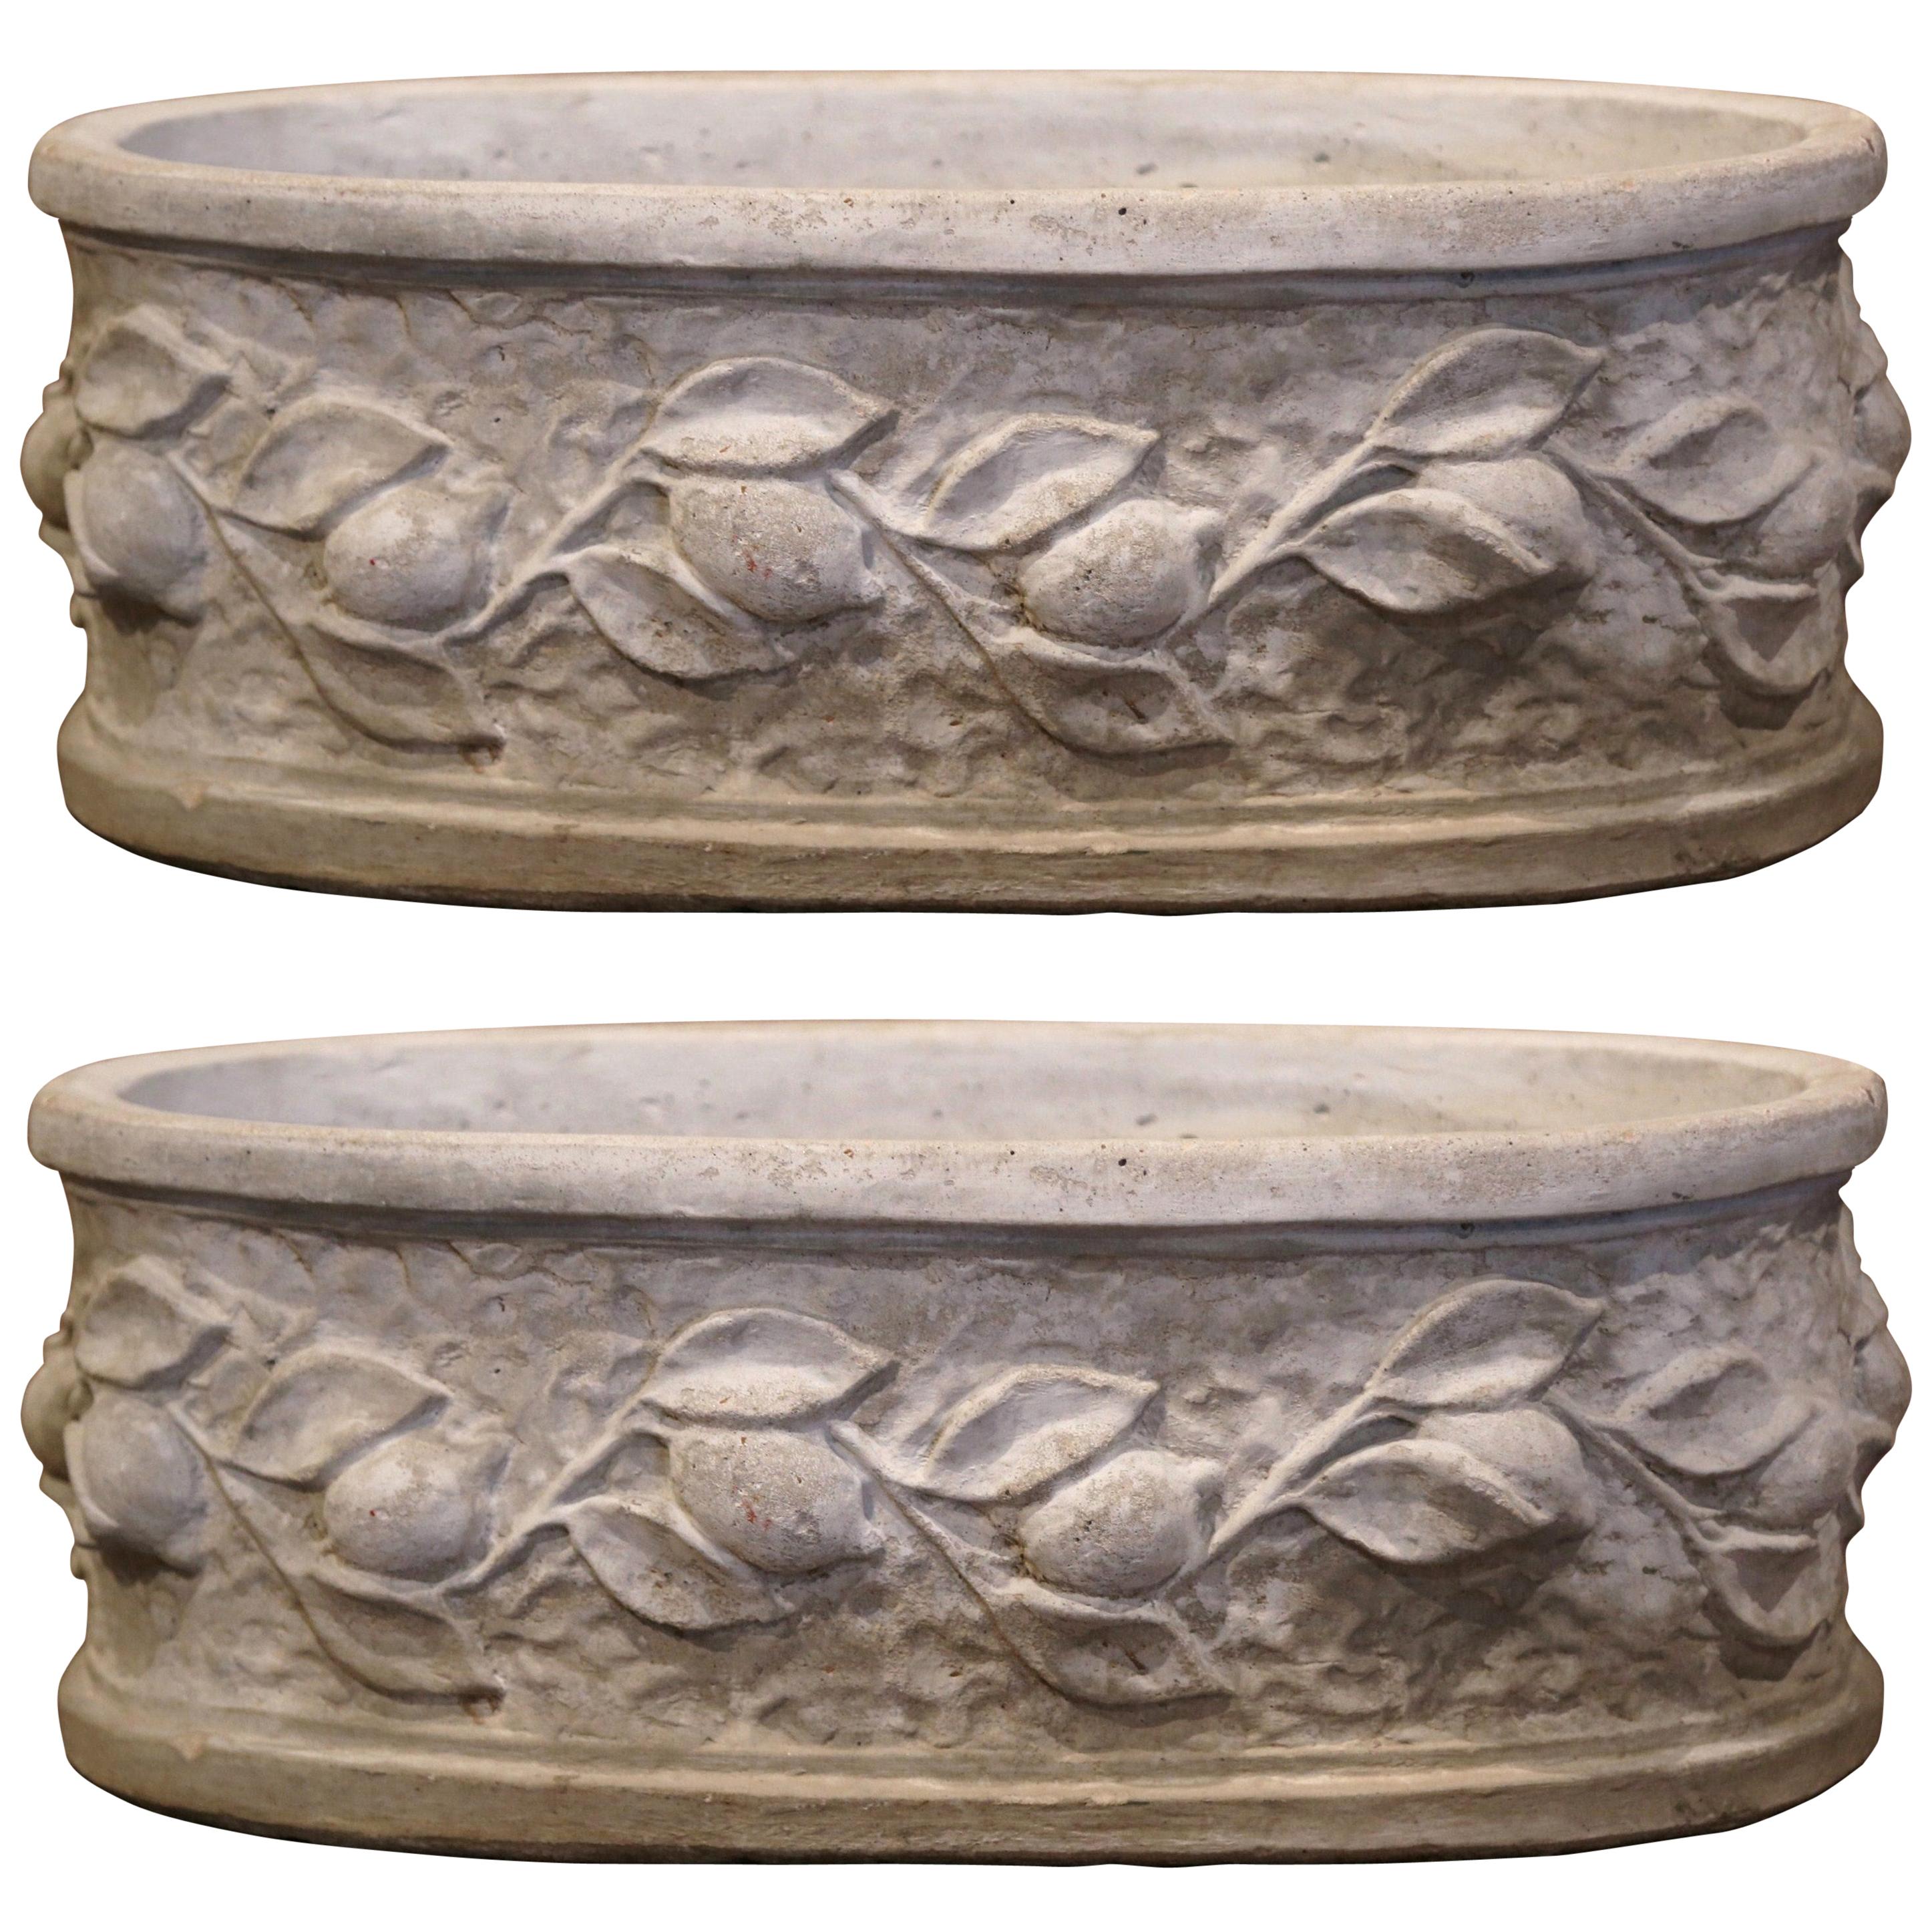 Pair of Vintage French Carved Oval Concrete Planters with Lemon and Leaf Decor